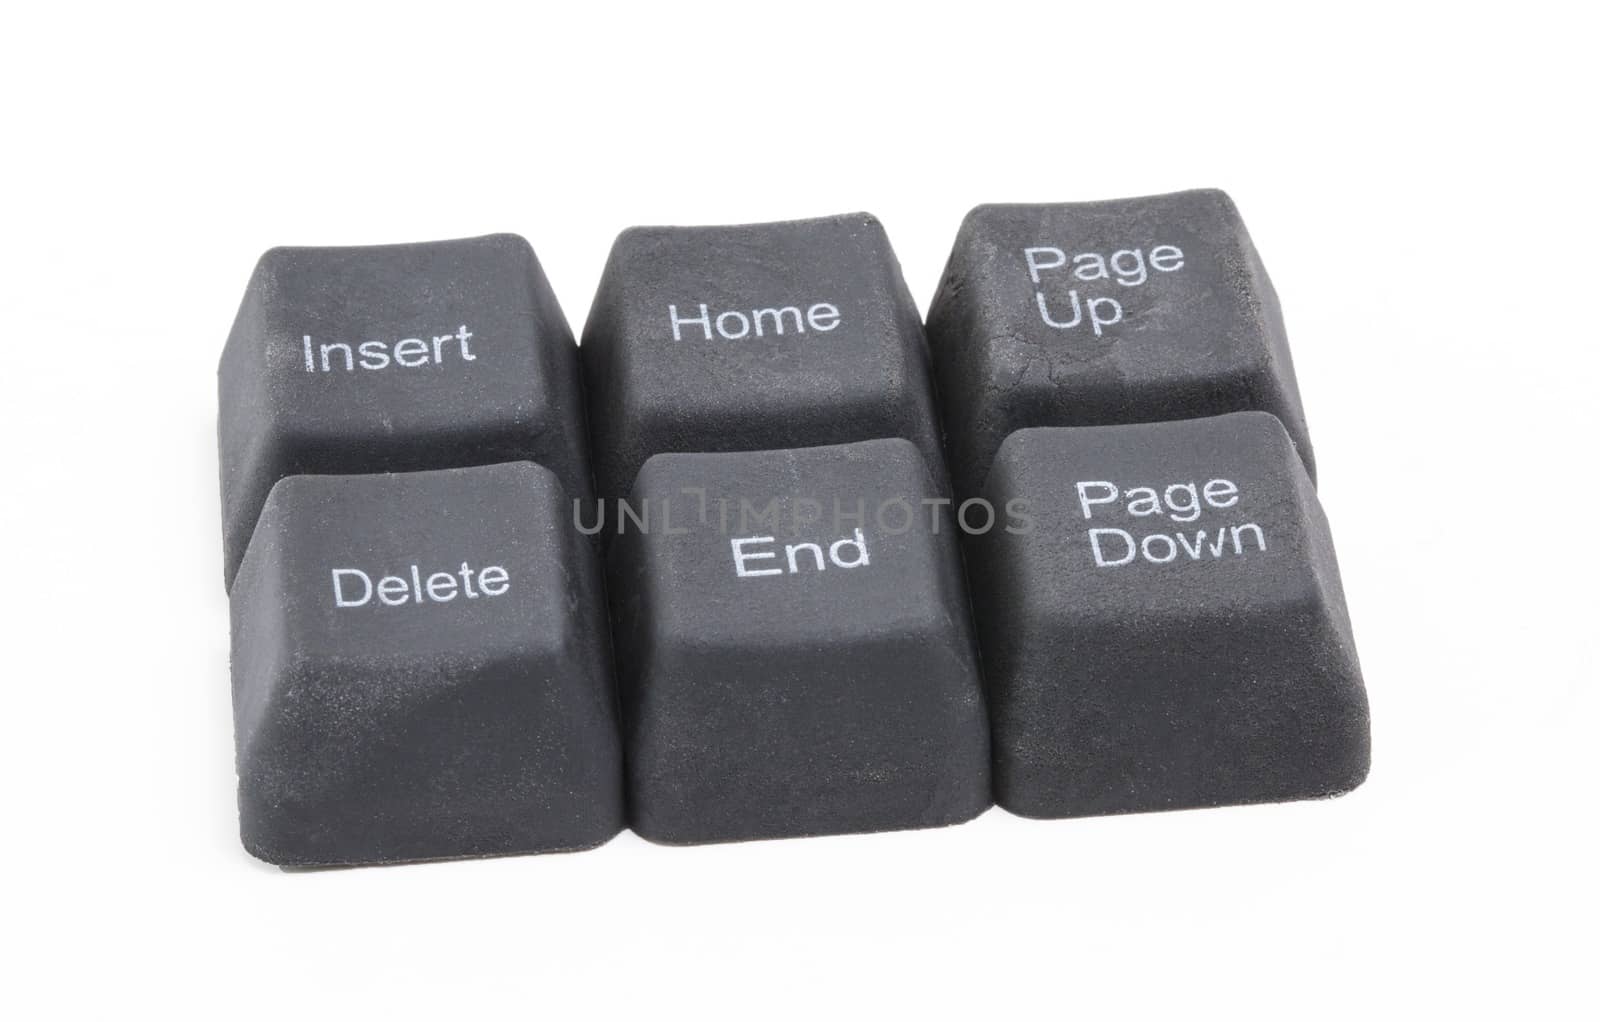 Part of a black keyboard with white background